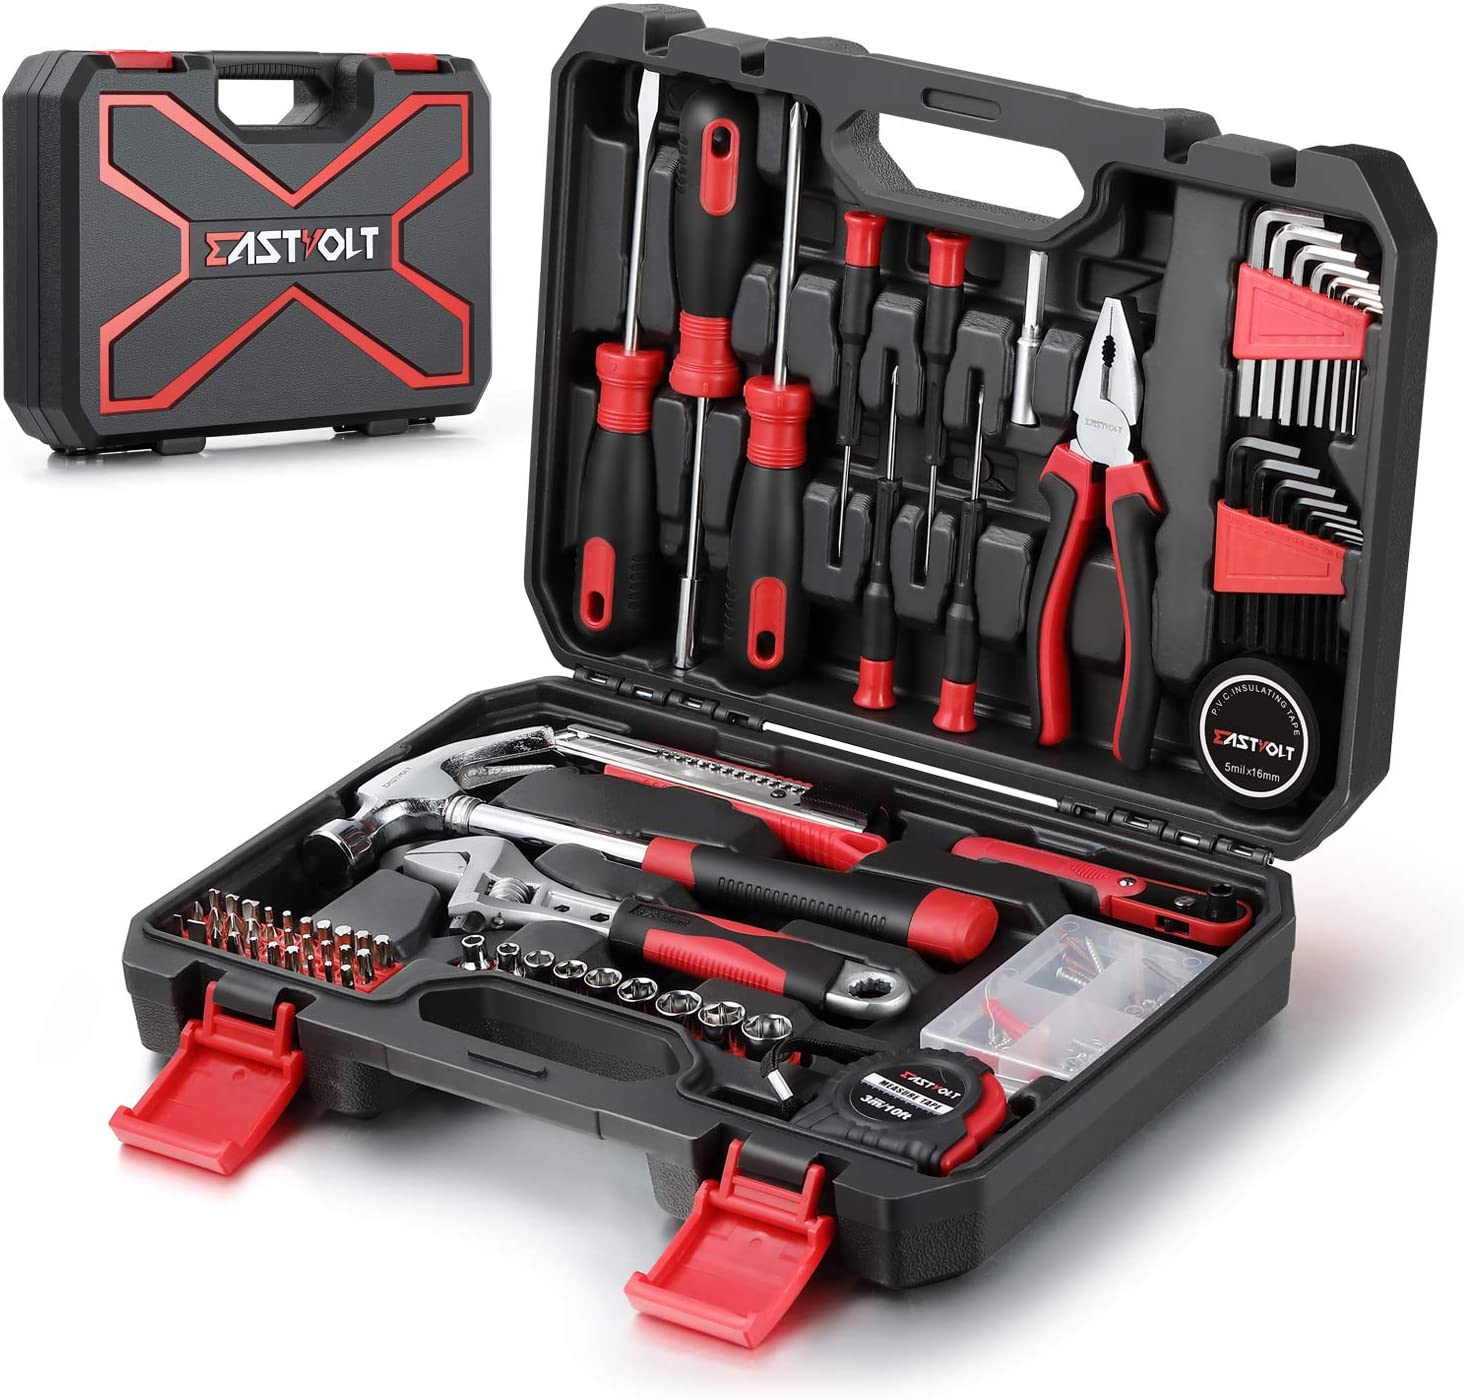 40-Piece Household Tools Kit - Small Basic Home Tool Set with